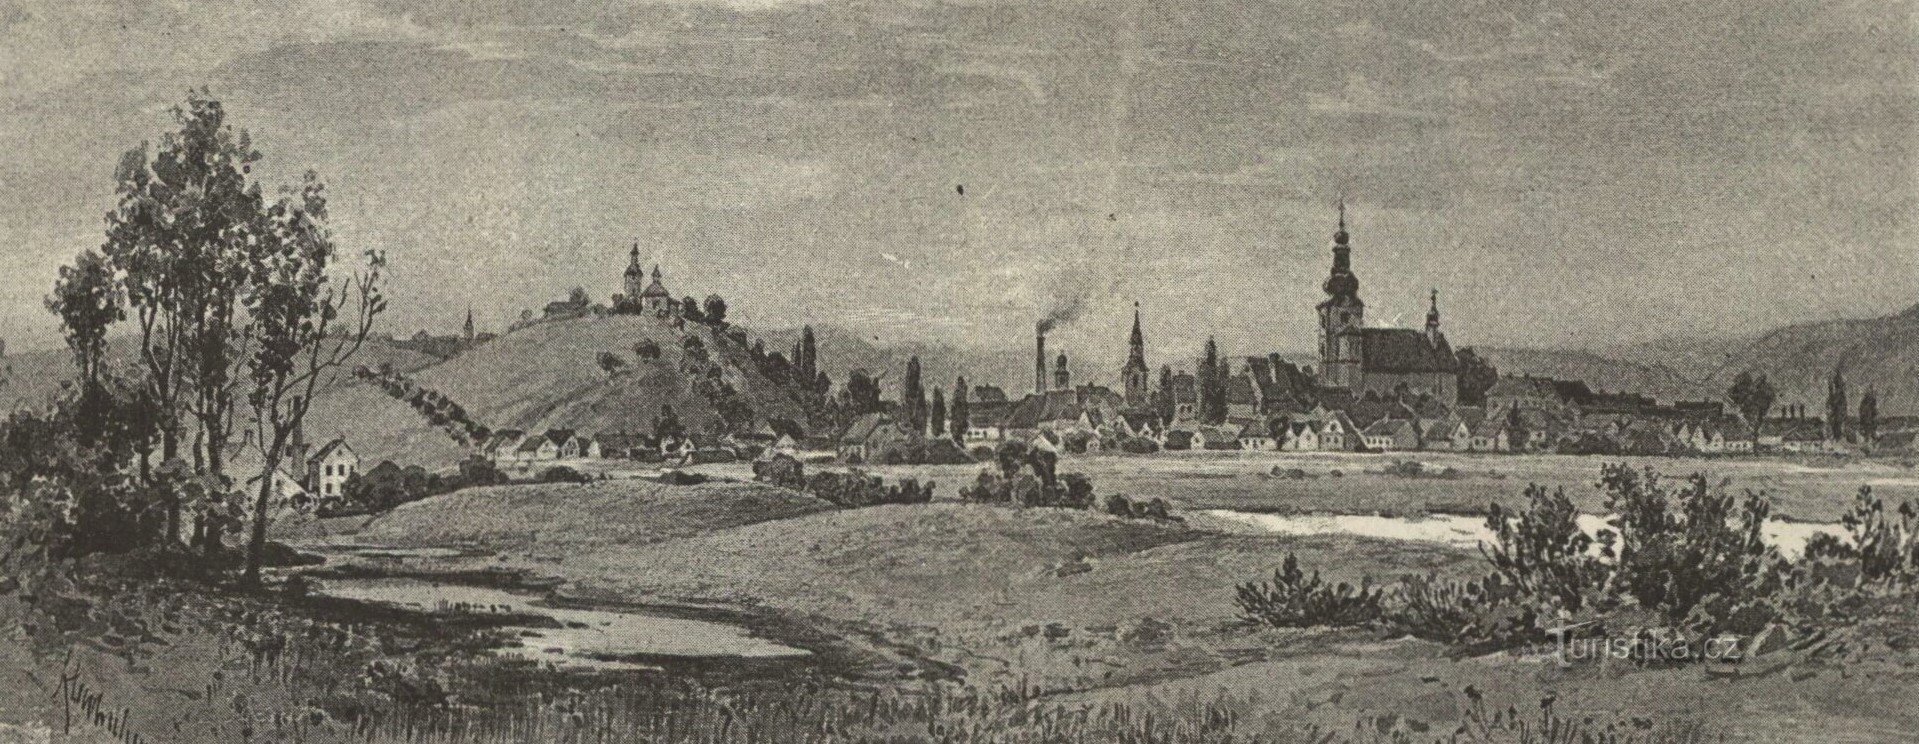 Třebechovice pod Oreb on a drawing from the end of the 19th century